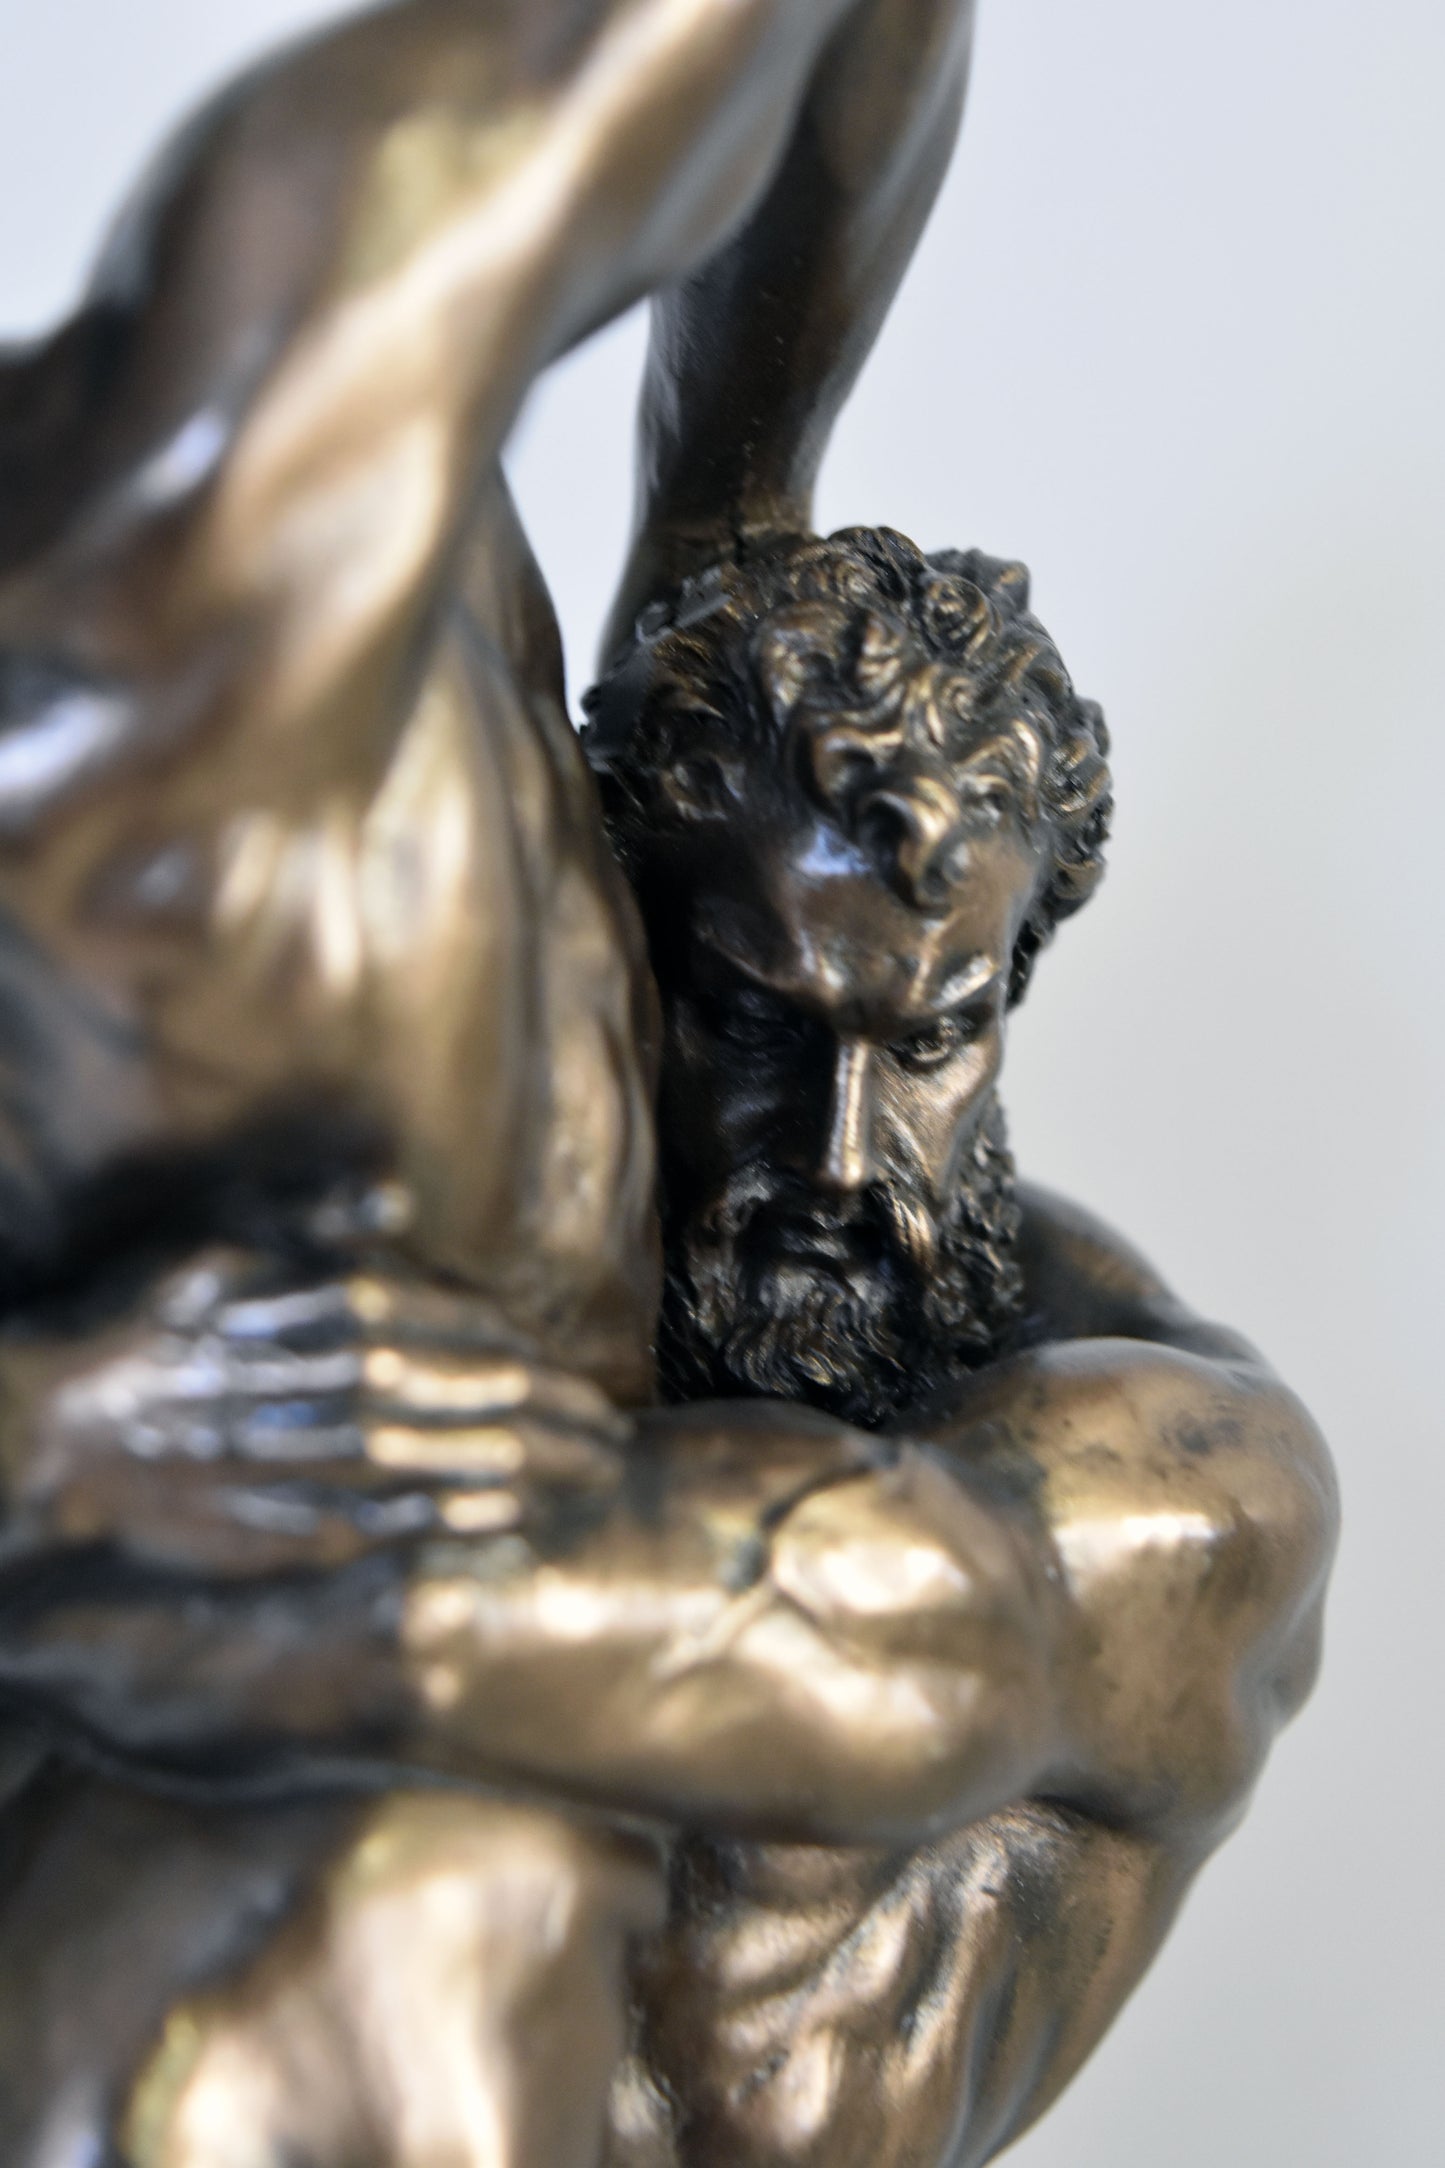 Hercules Heracles - Greek Divine Hero - Antaeus of Libya - Wrestling Match - Part of the Labours - Cold Cast Bronze Resin